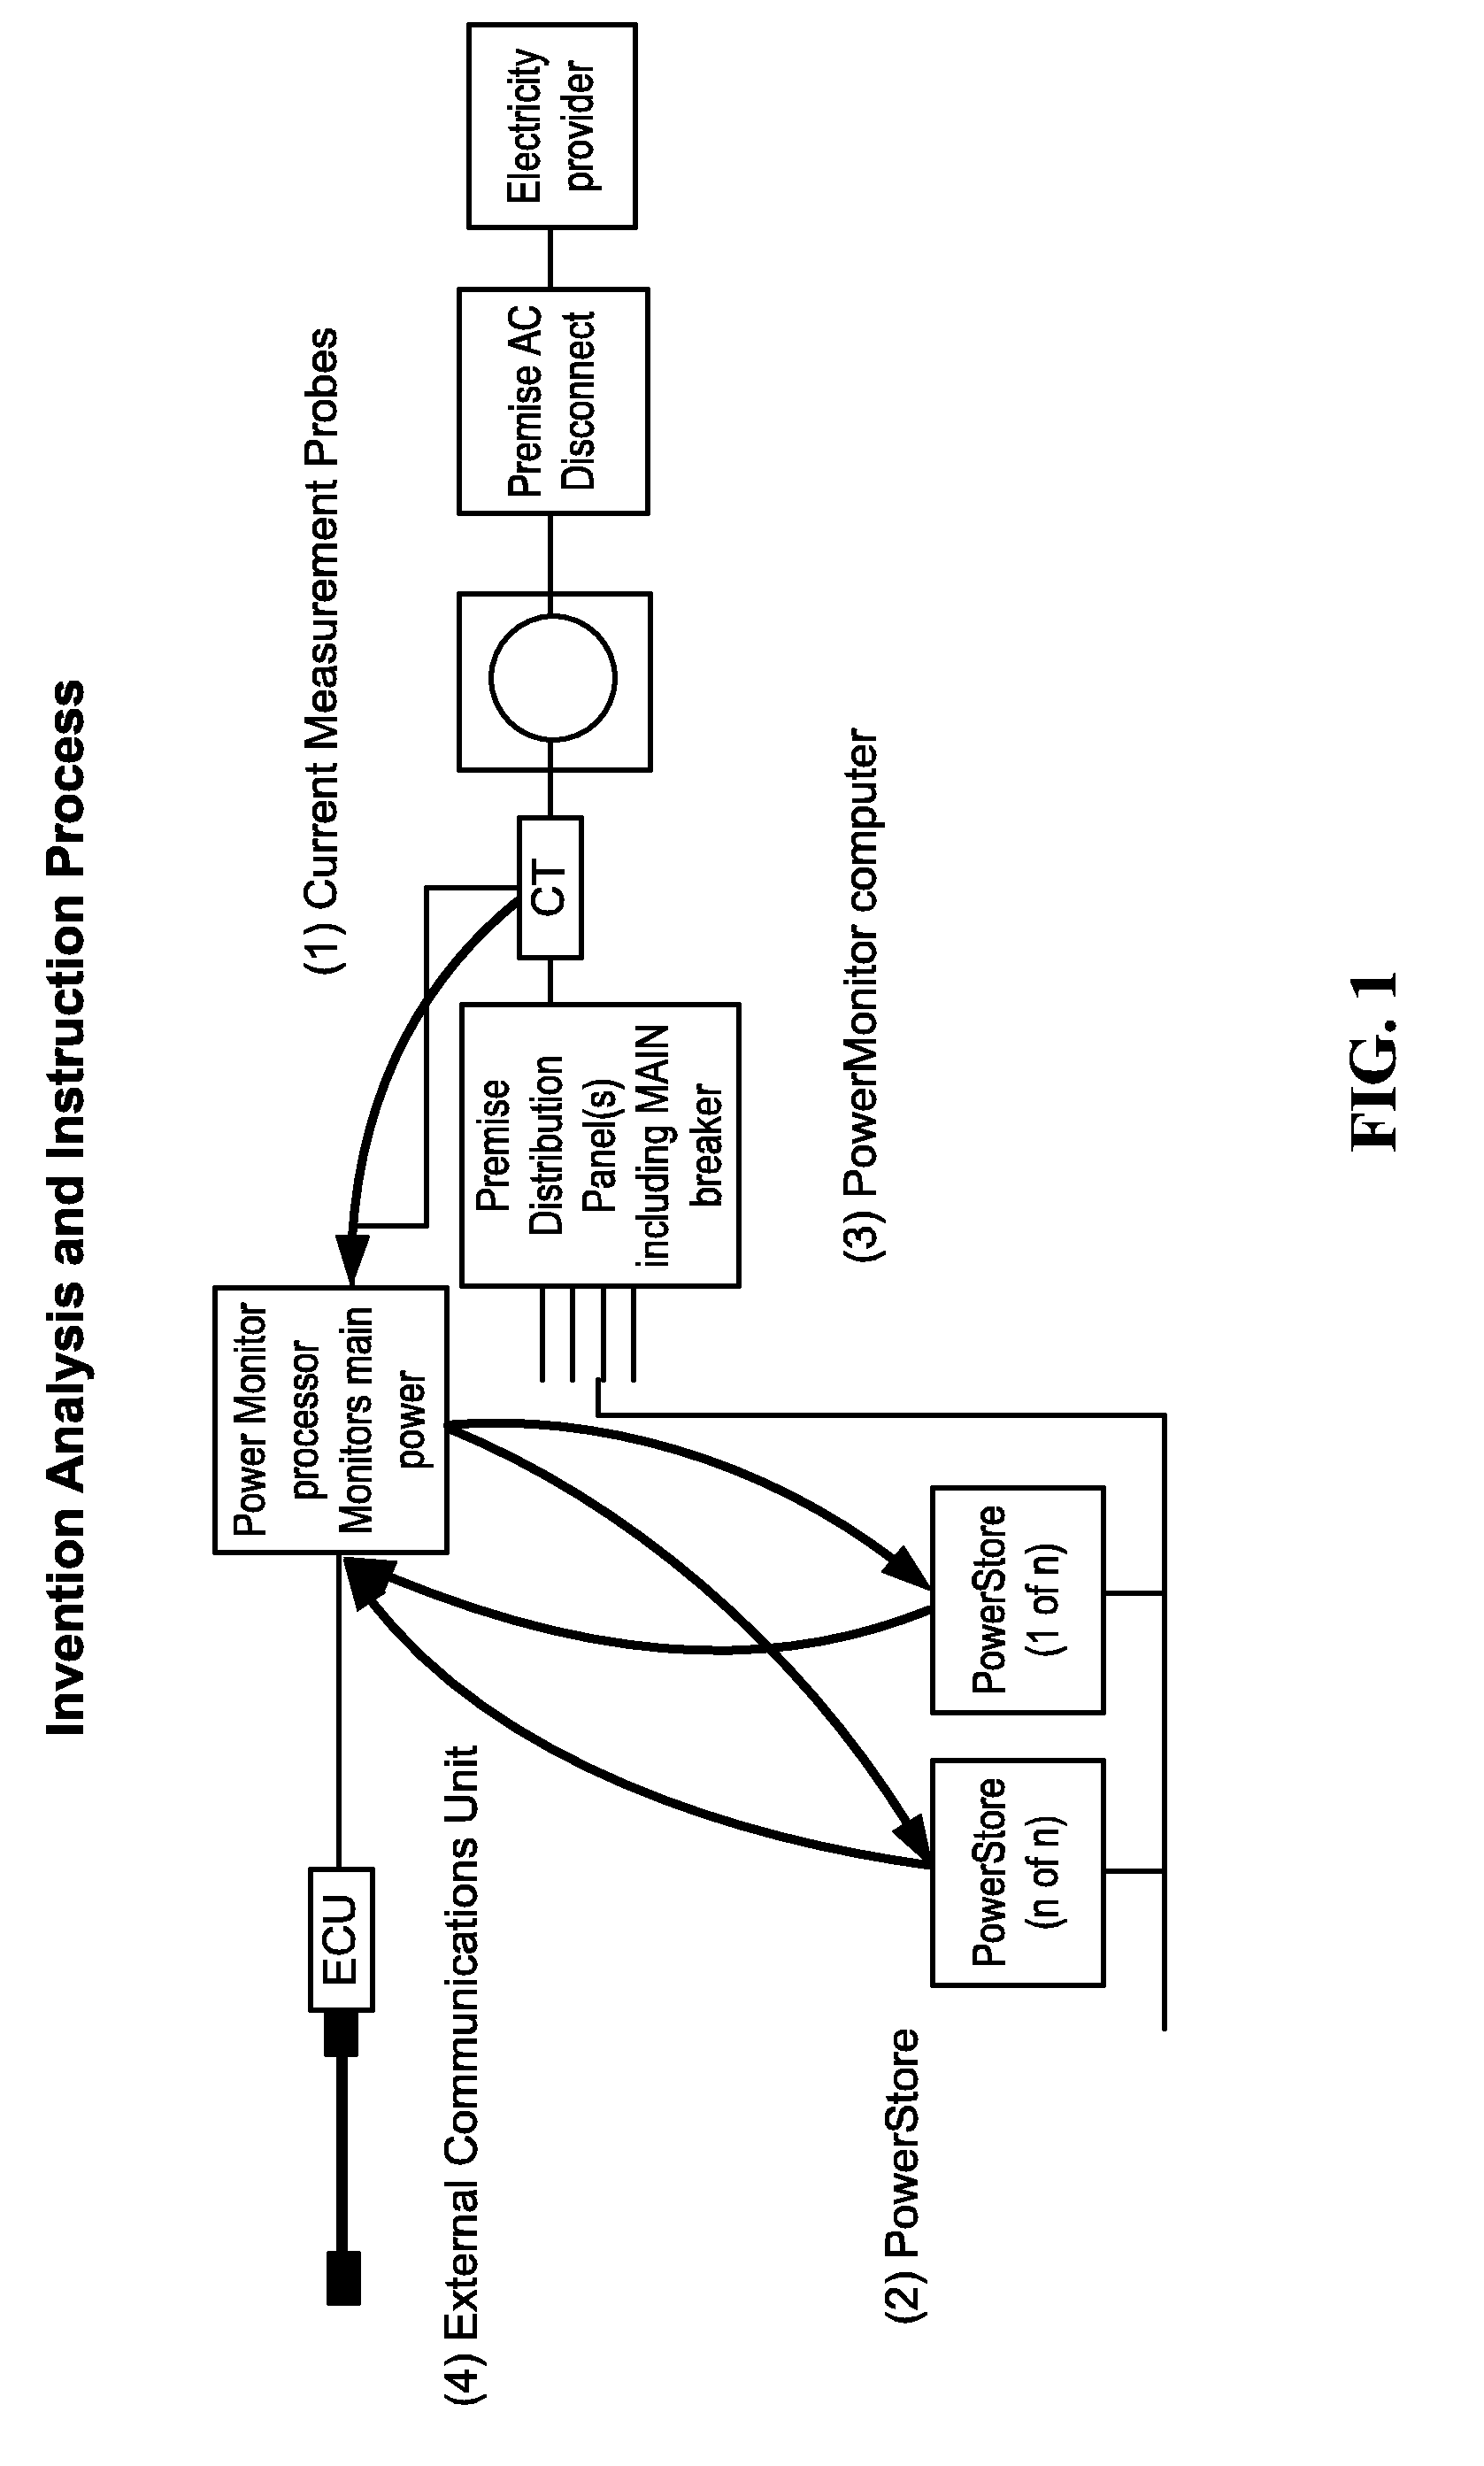 High speed feedback adjustment of power charge/discharge from energy storage system